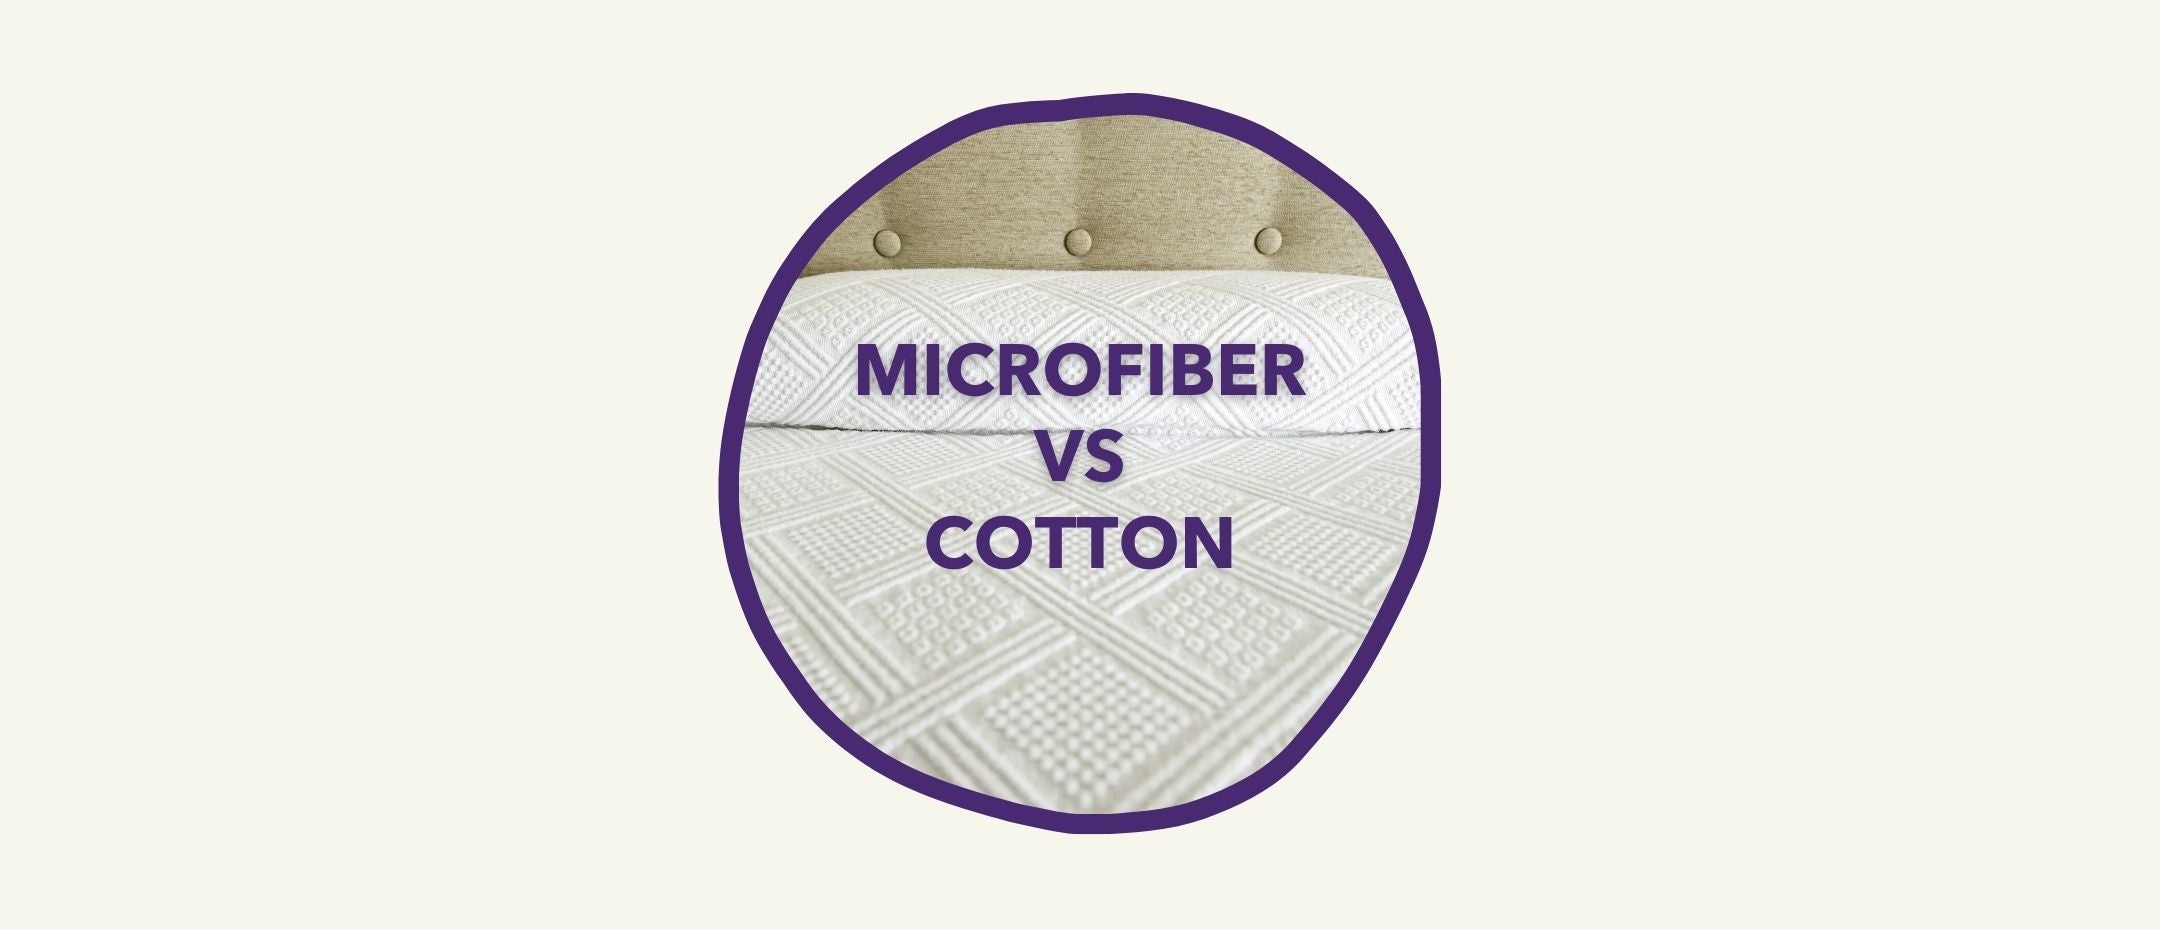 Compare Cotton and Nylon Absorbency, Activity